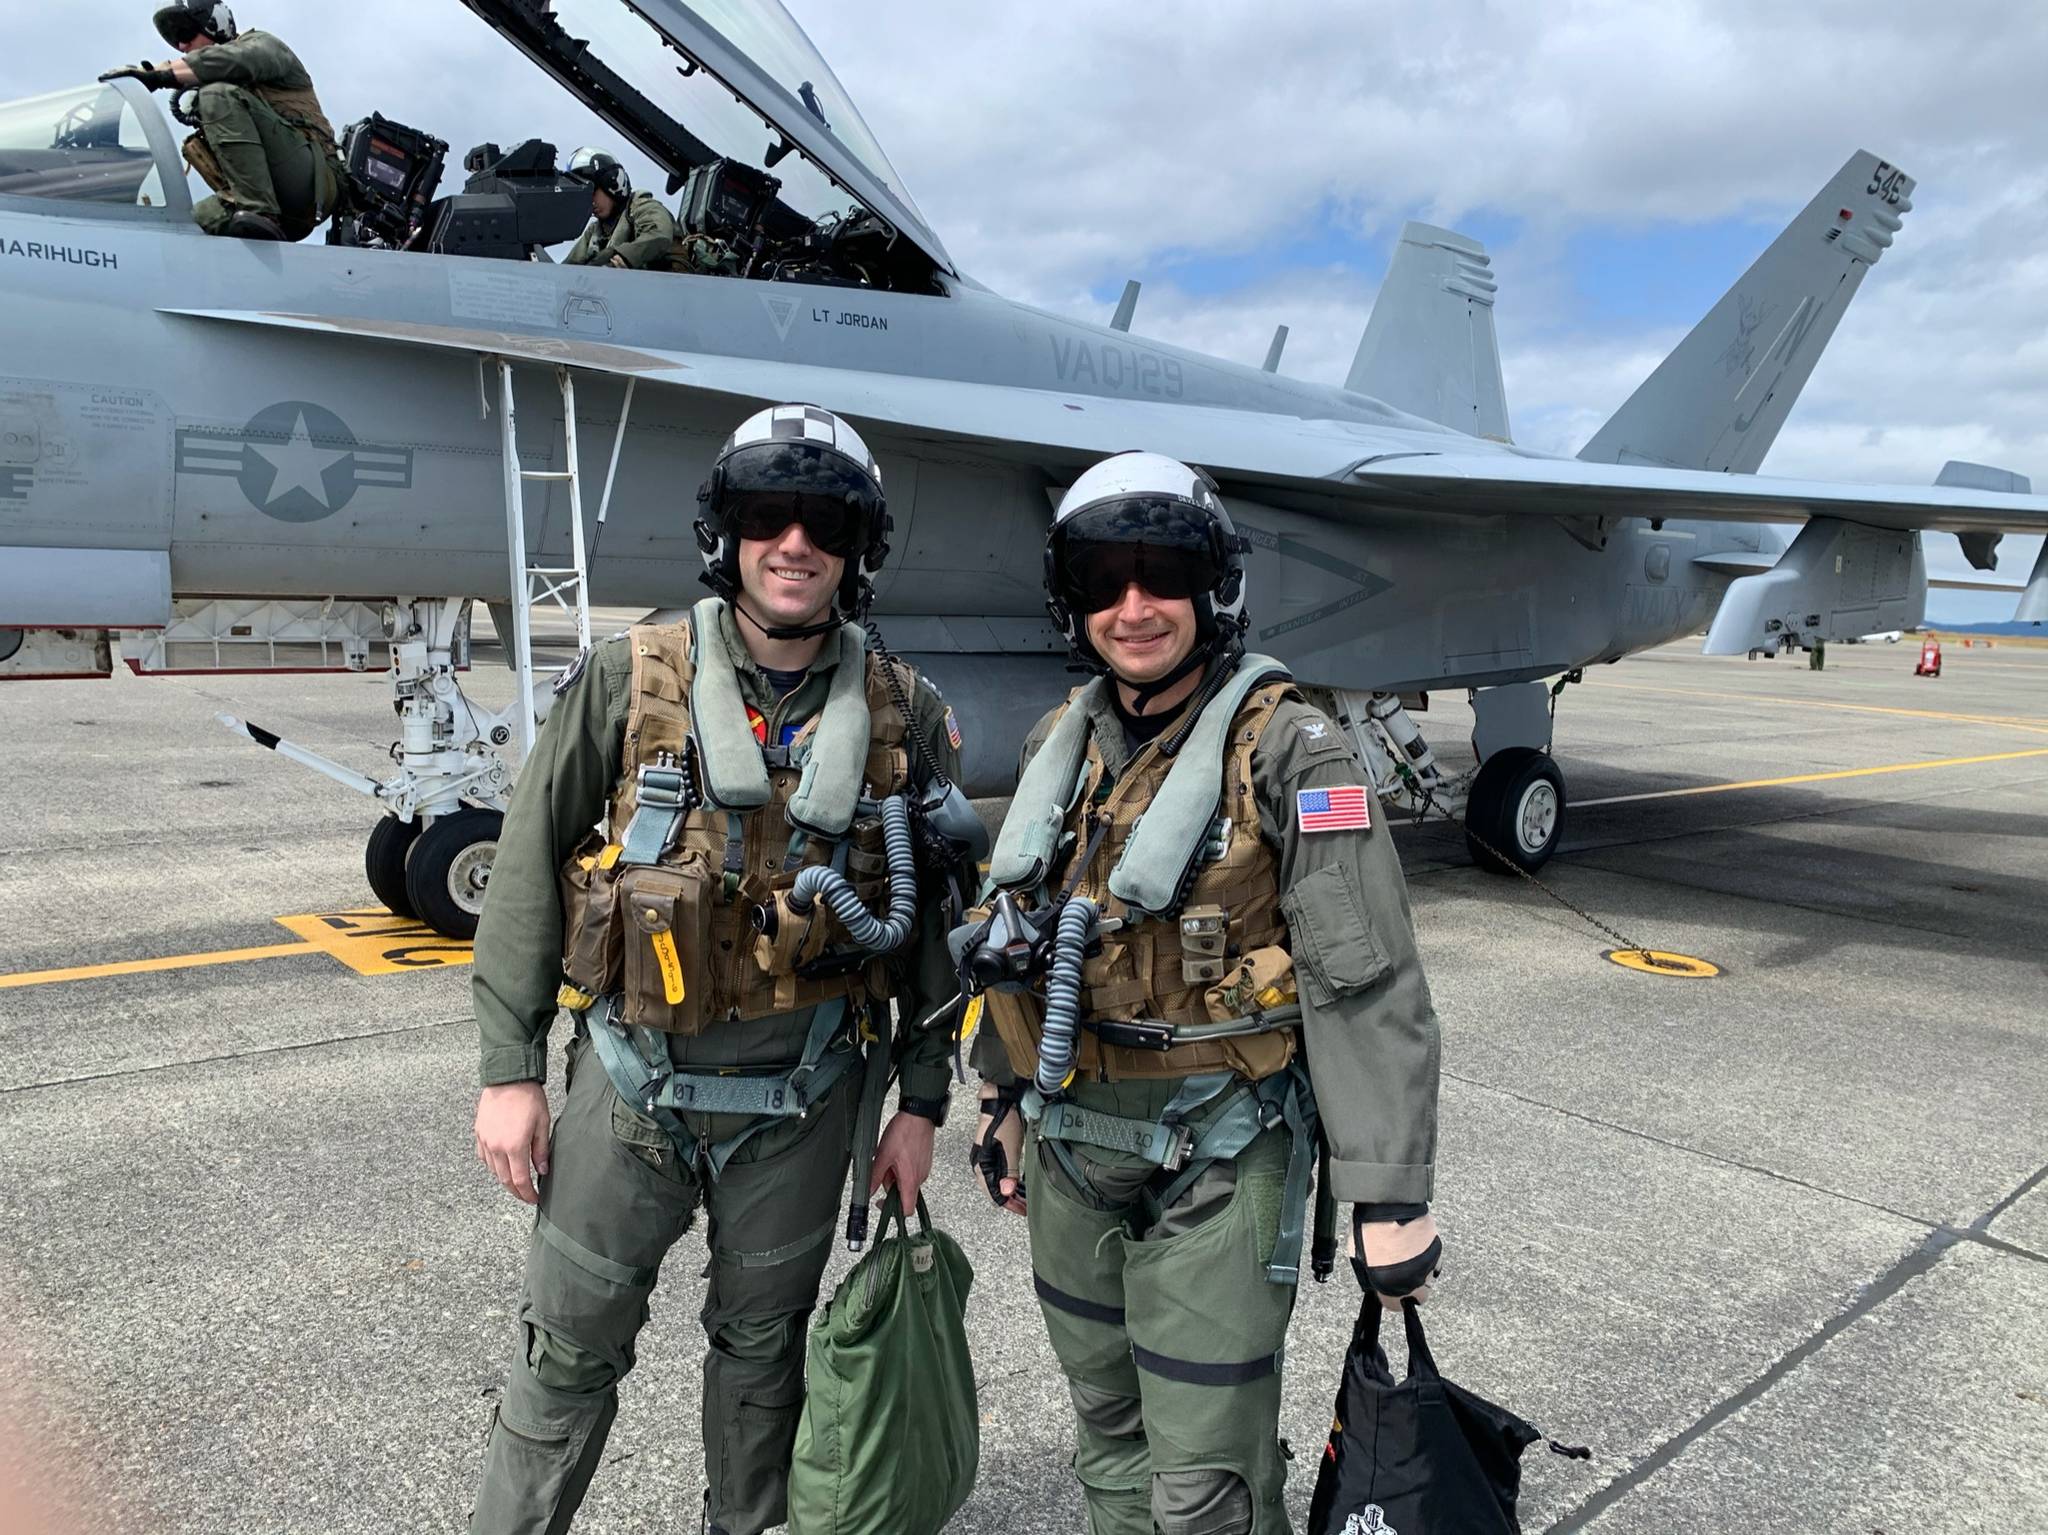 Capt. Matthew “Flounder” Arny, right, with pilot Lt. John Sauls from VAQ-129. Arny is retiring after 33 years in the military. Photo provided